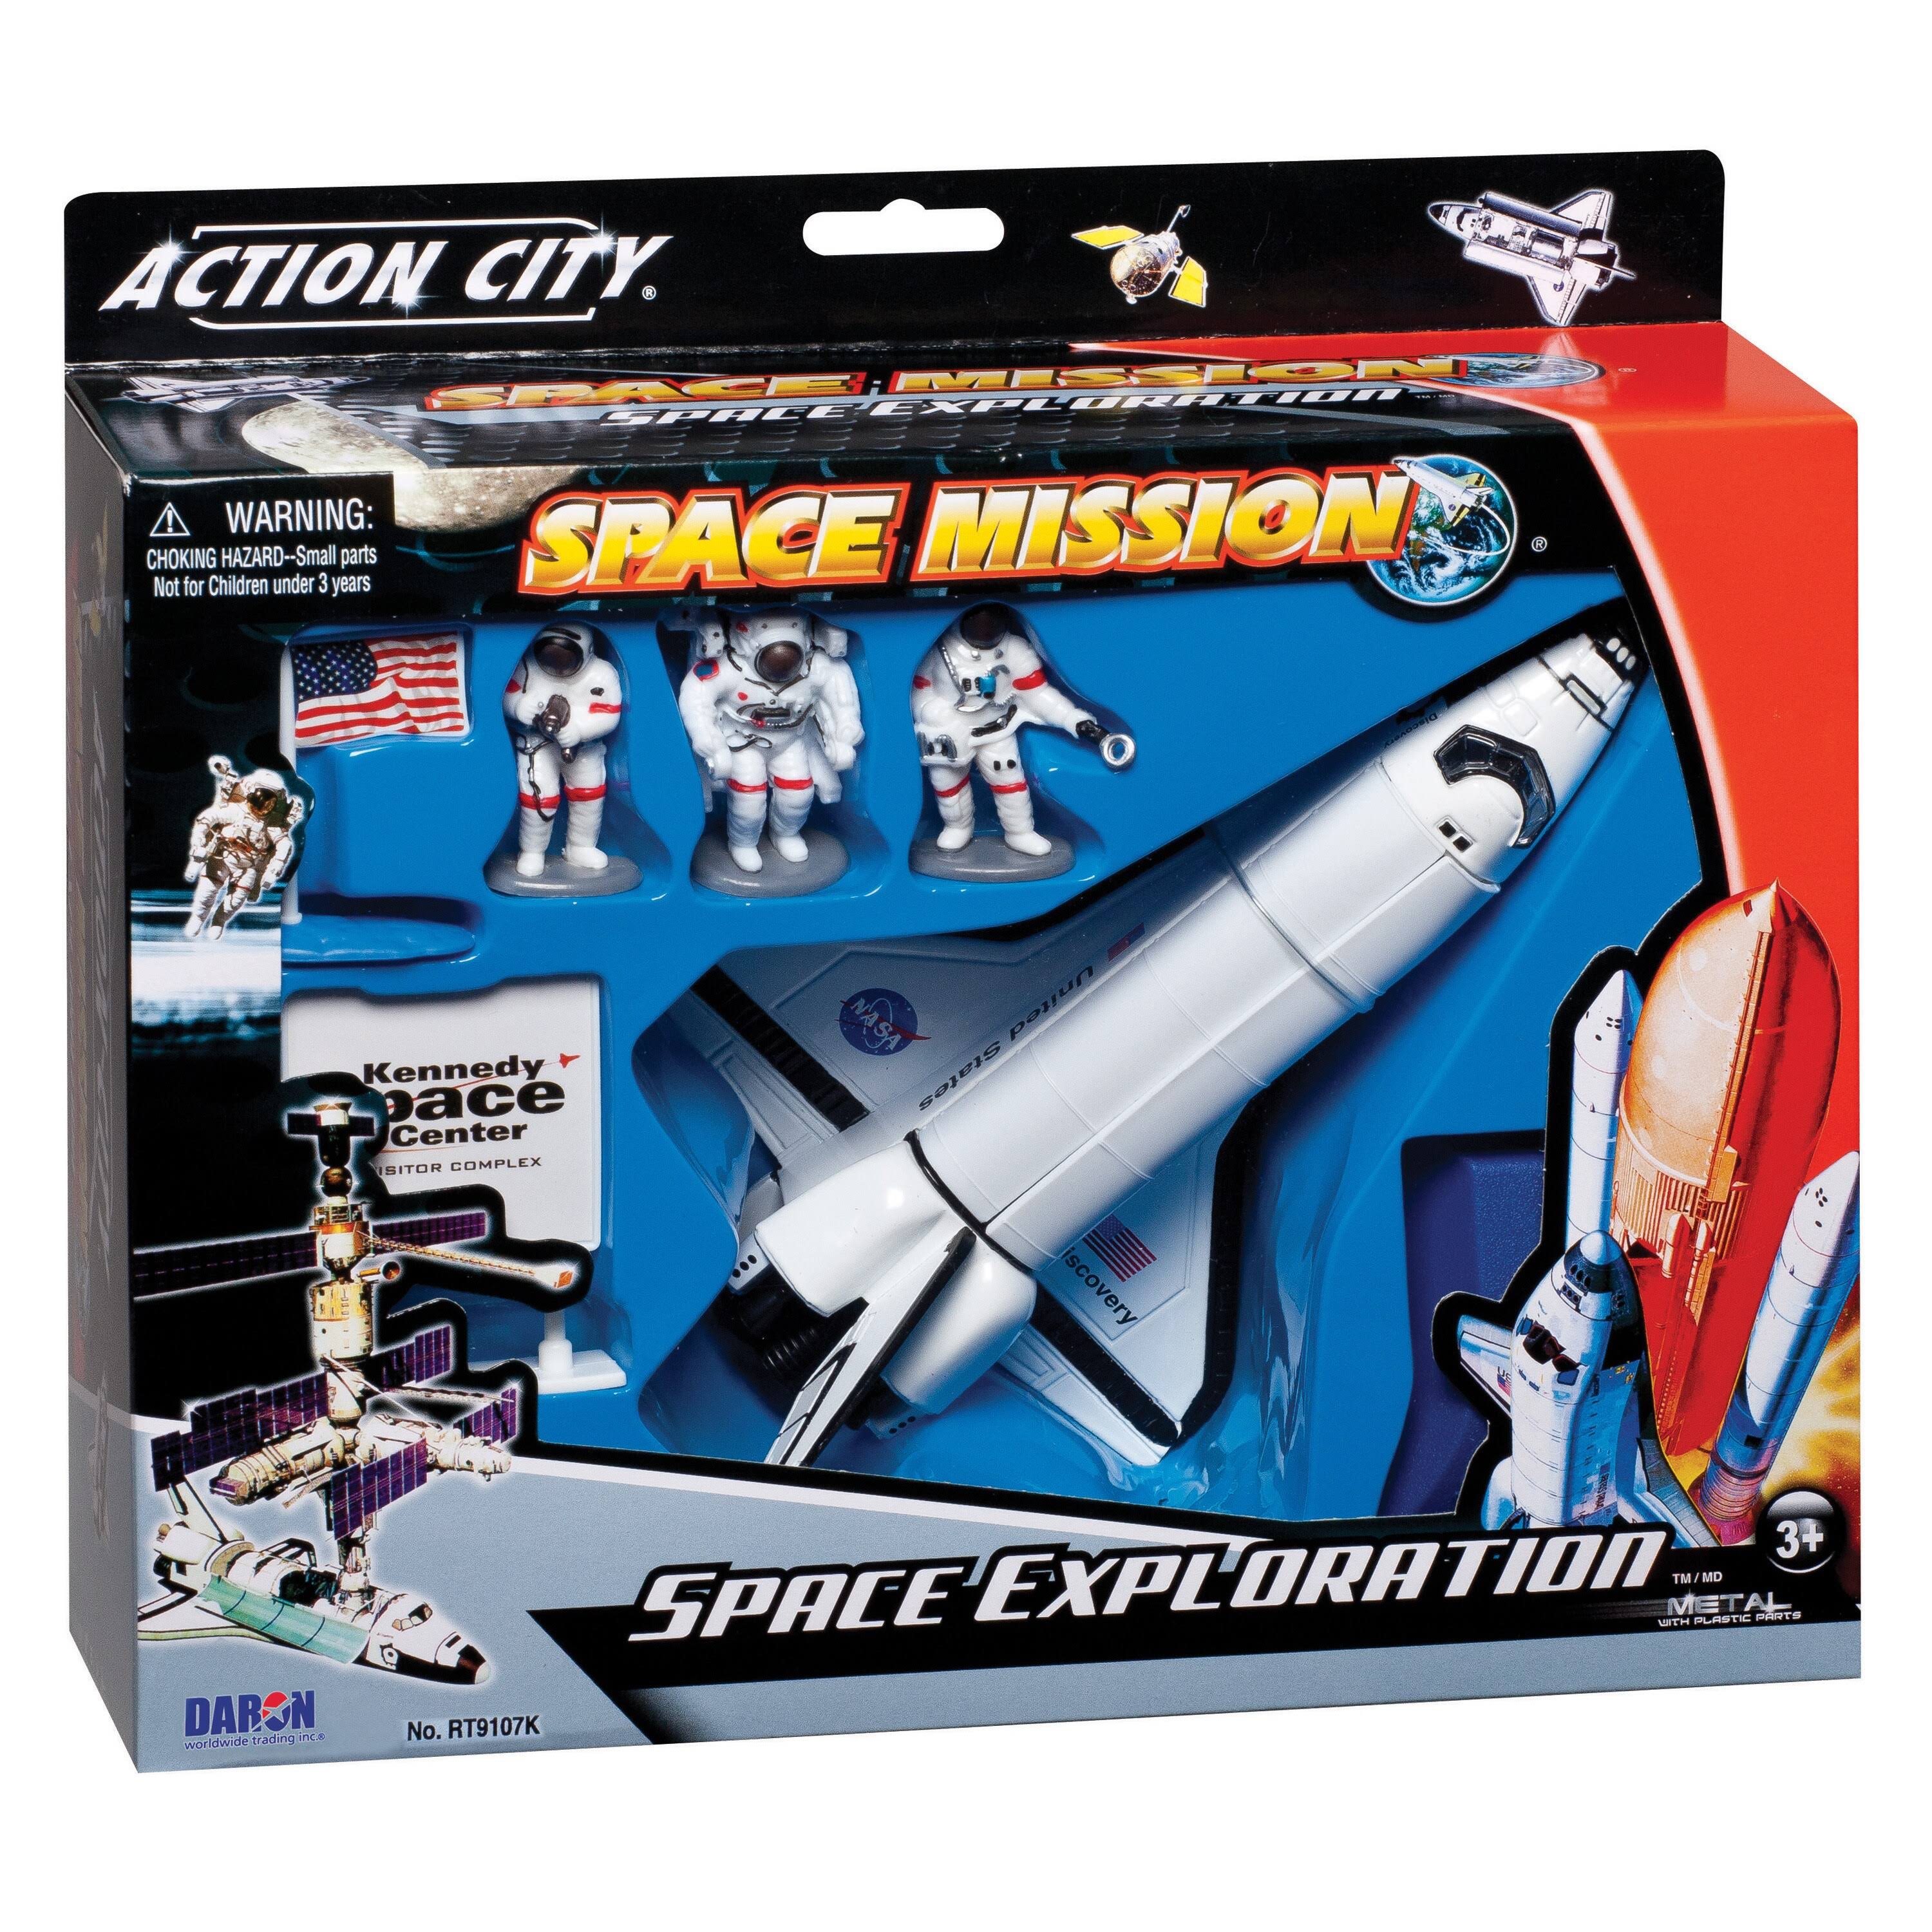 Daron Space Exploration Action City Space Mission